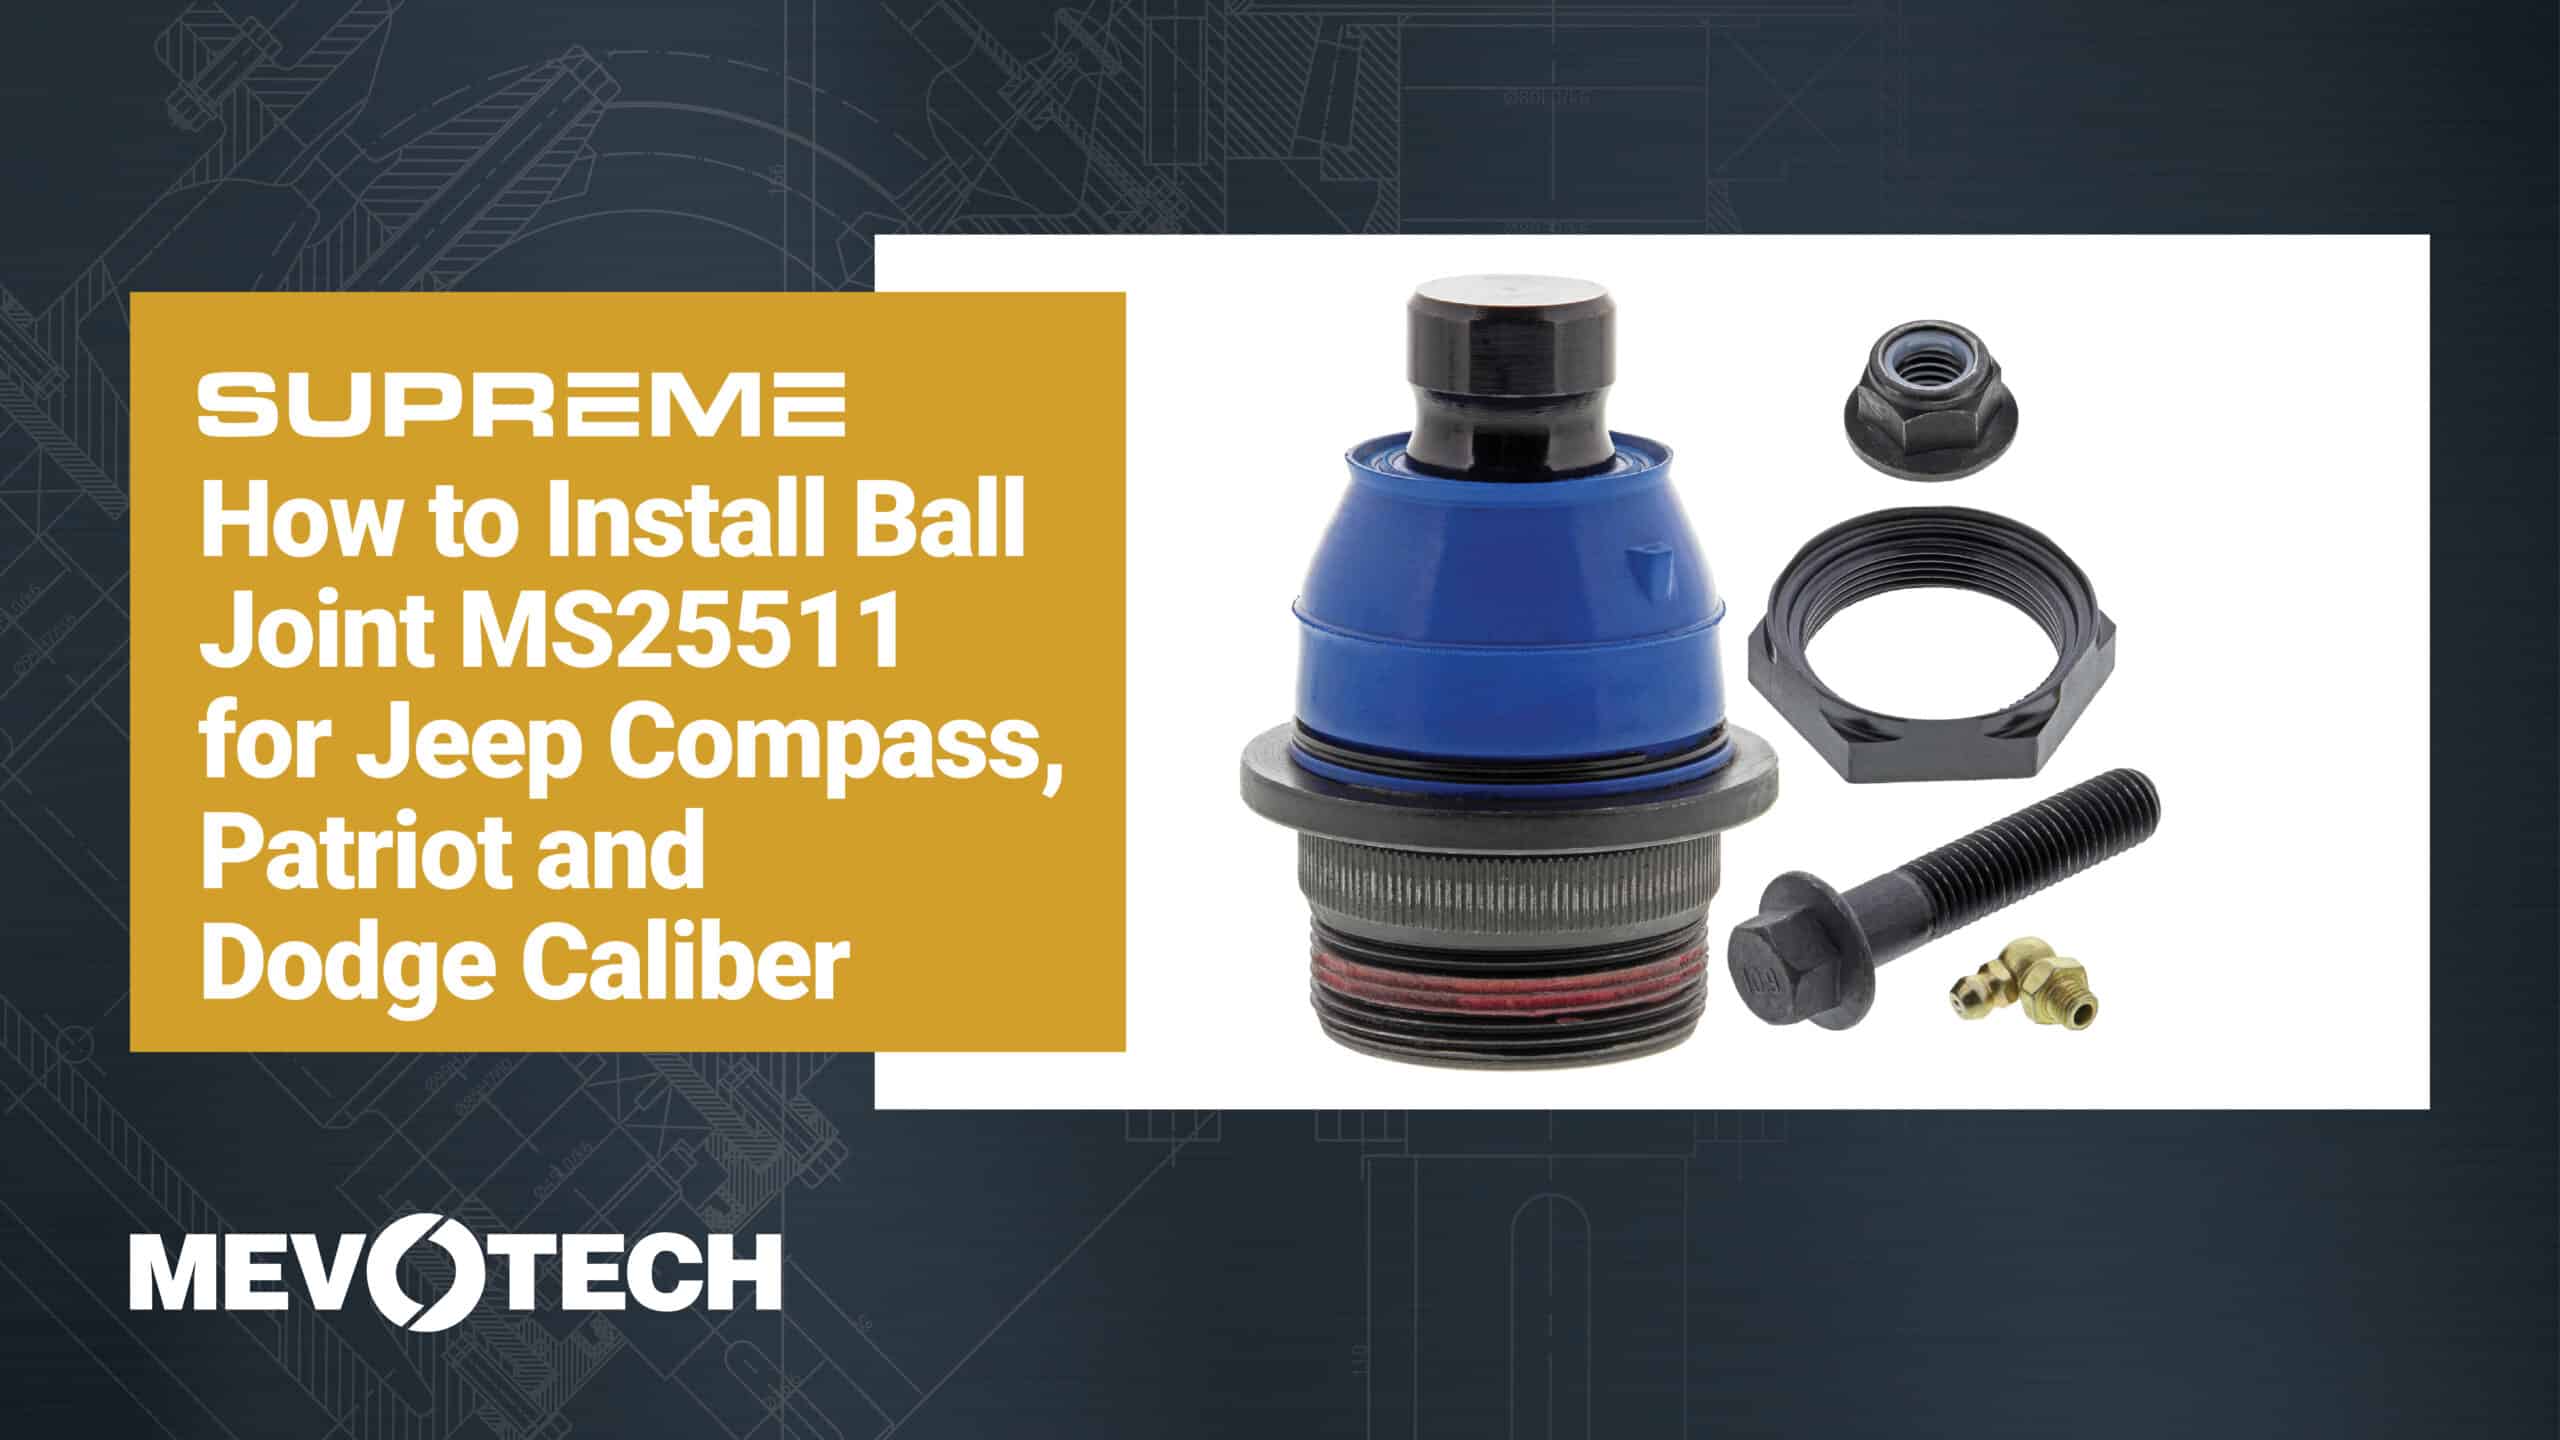 How to Install Supreme Ball Joint MS25511